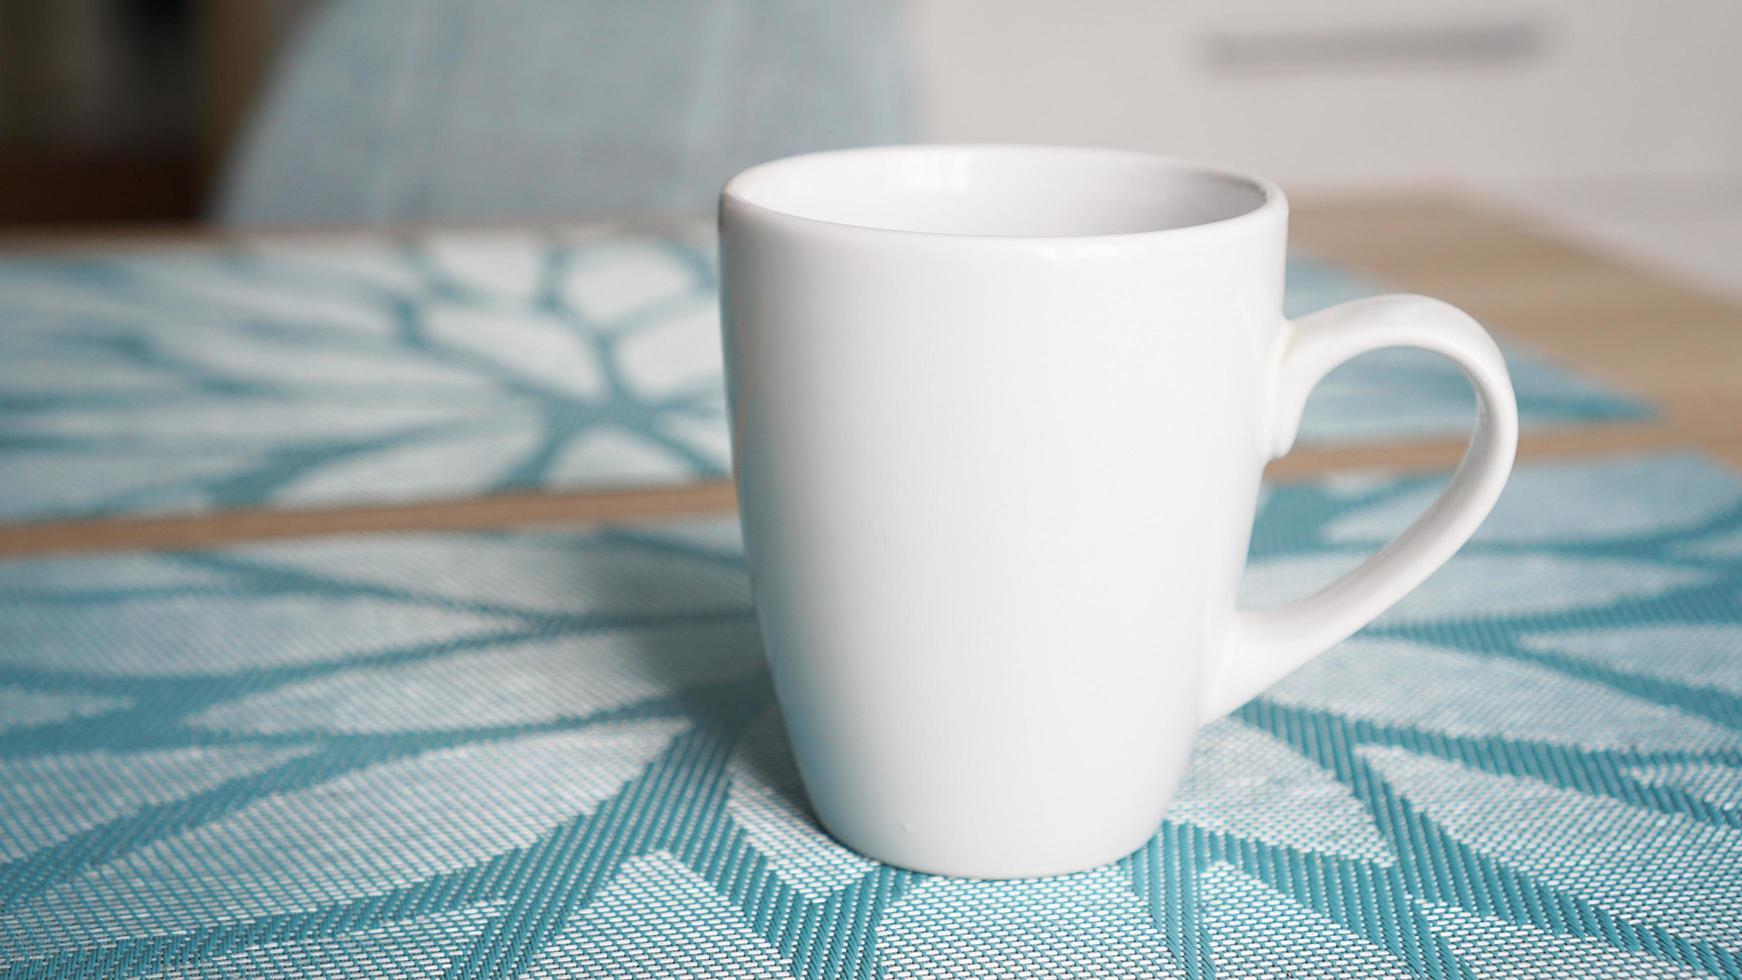 Clean white mug with handle stands on blue table photo